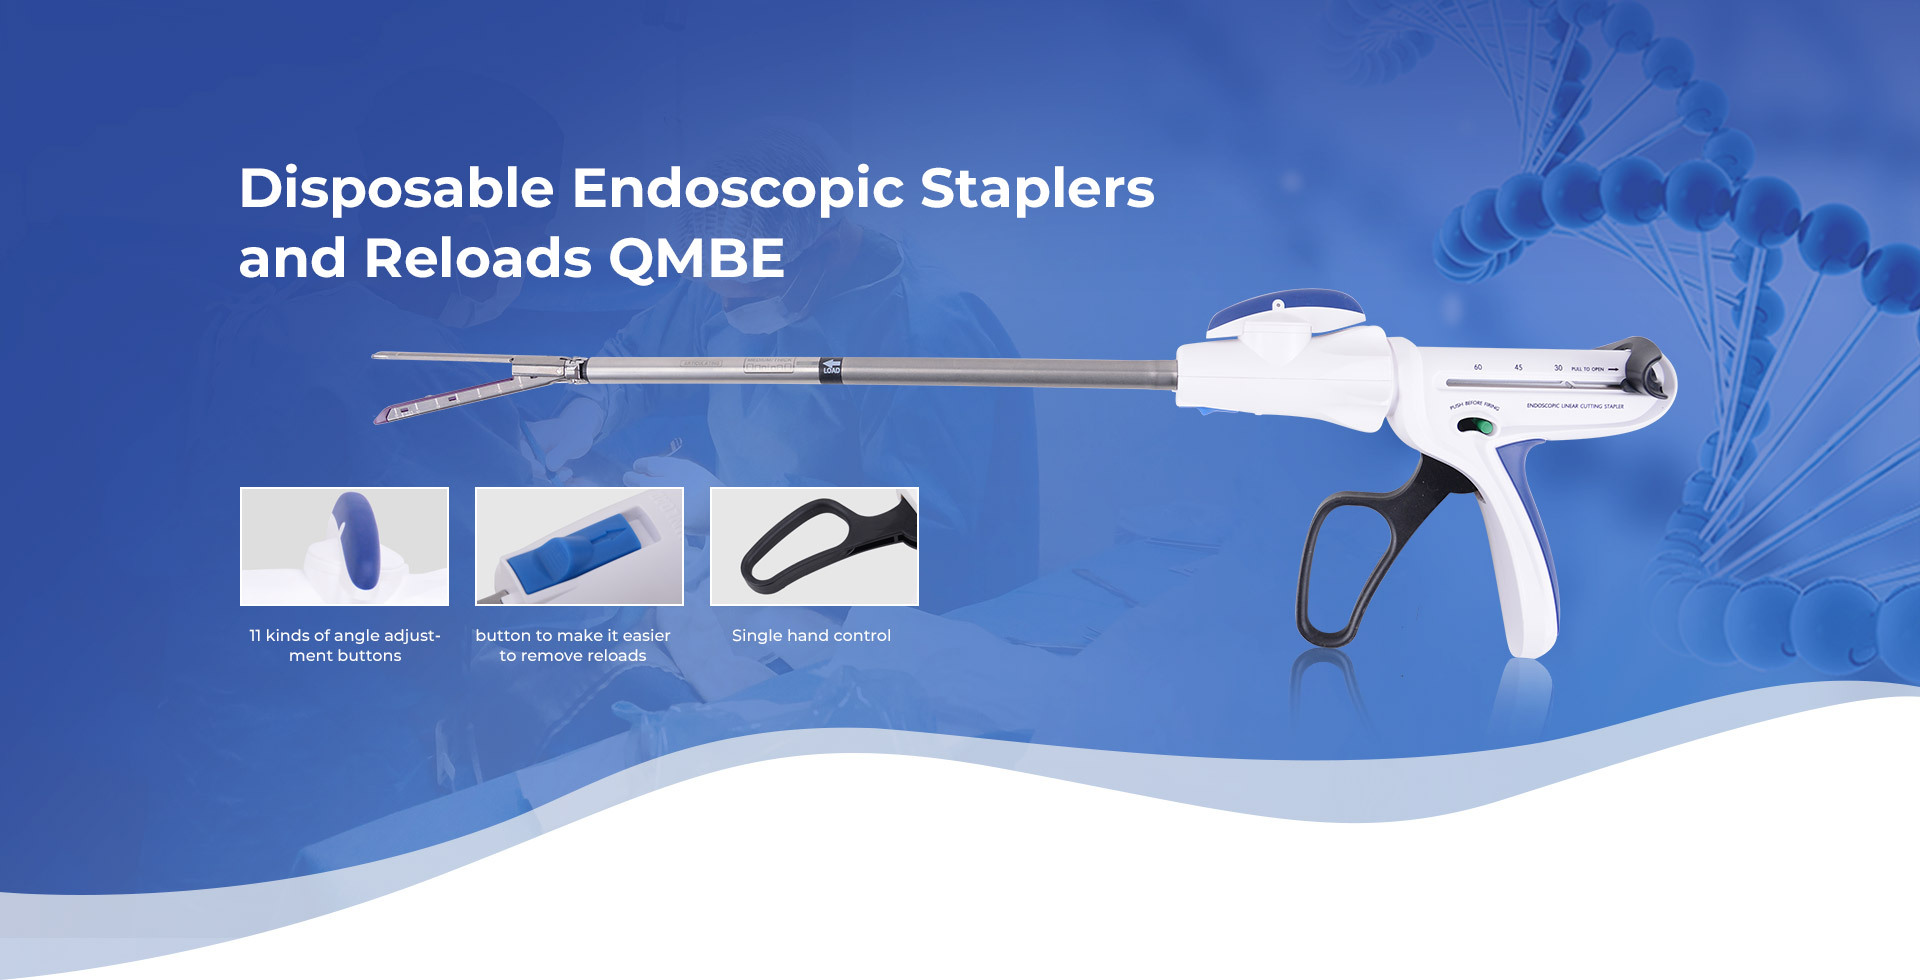 Disposable Endoscopic Staplers  and Reloads QMBE